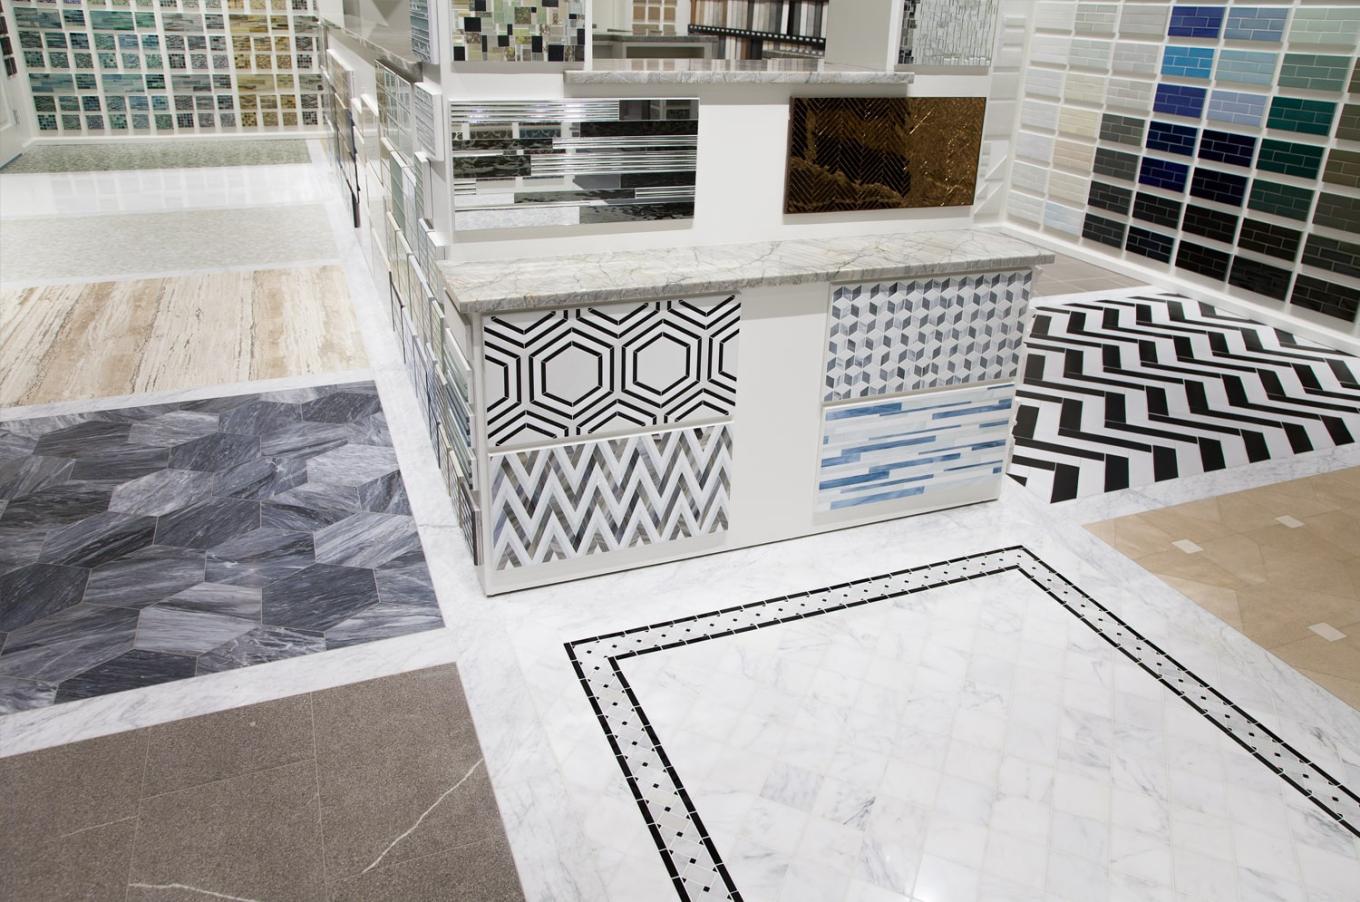 Some of the floor installations at the Complete Tile Collection New Jersey showroom, featuring classic, timeless designs and patterns.